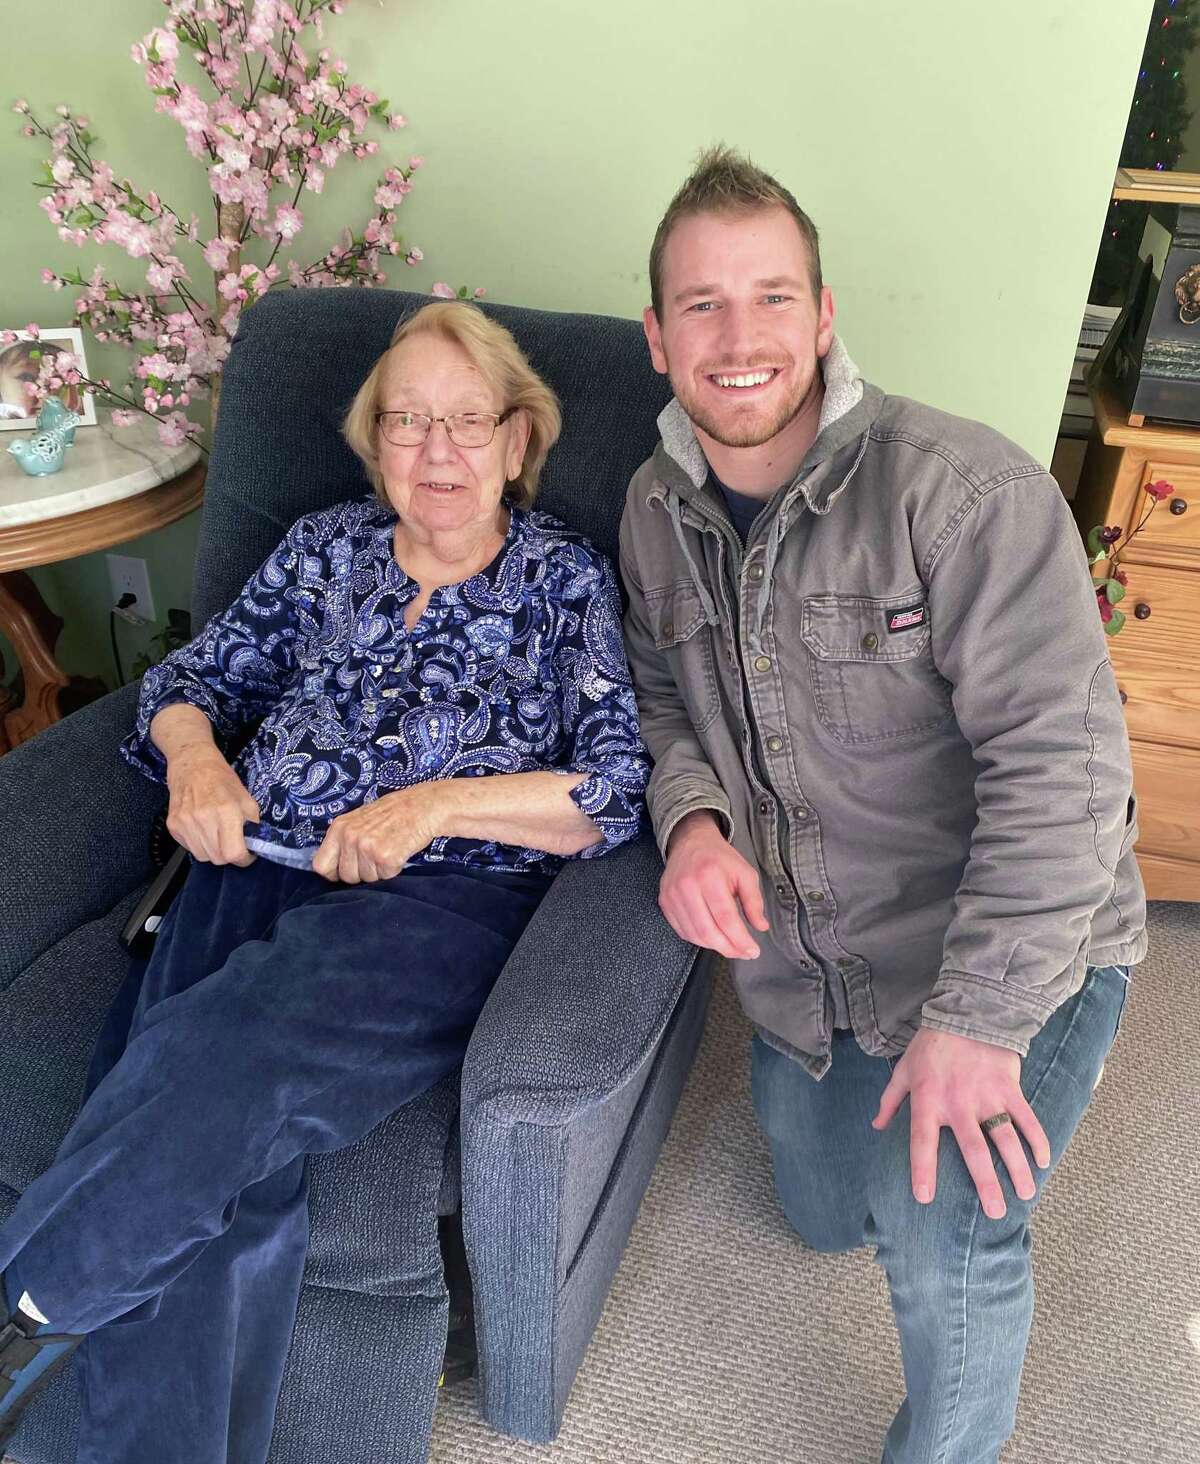 Grandma Grace (left) served as the inspiration for Tim Krupski to develop a self-lifting toilet seat. He partnered with Jeremy Bronen and in 2020, they launched SedMed.